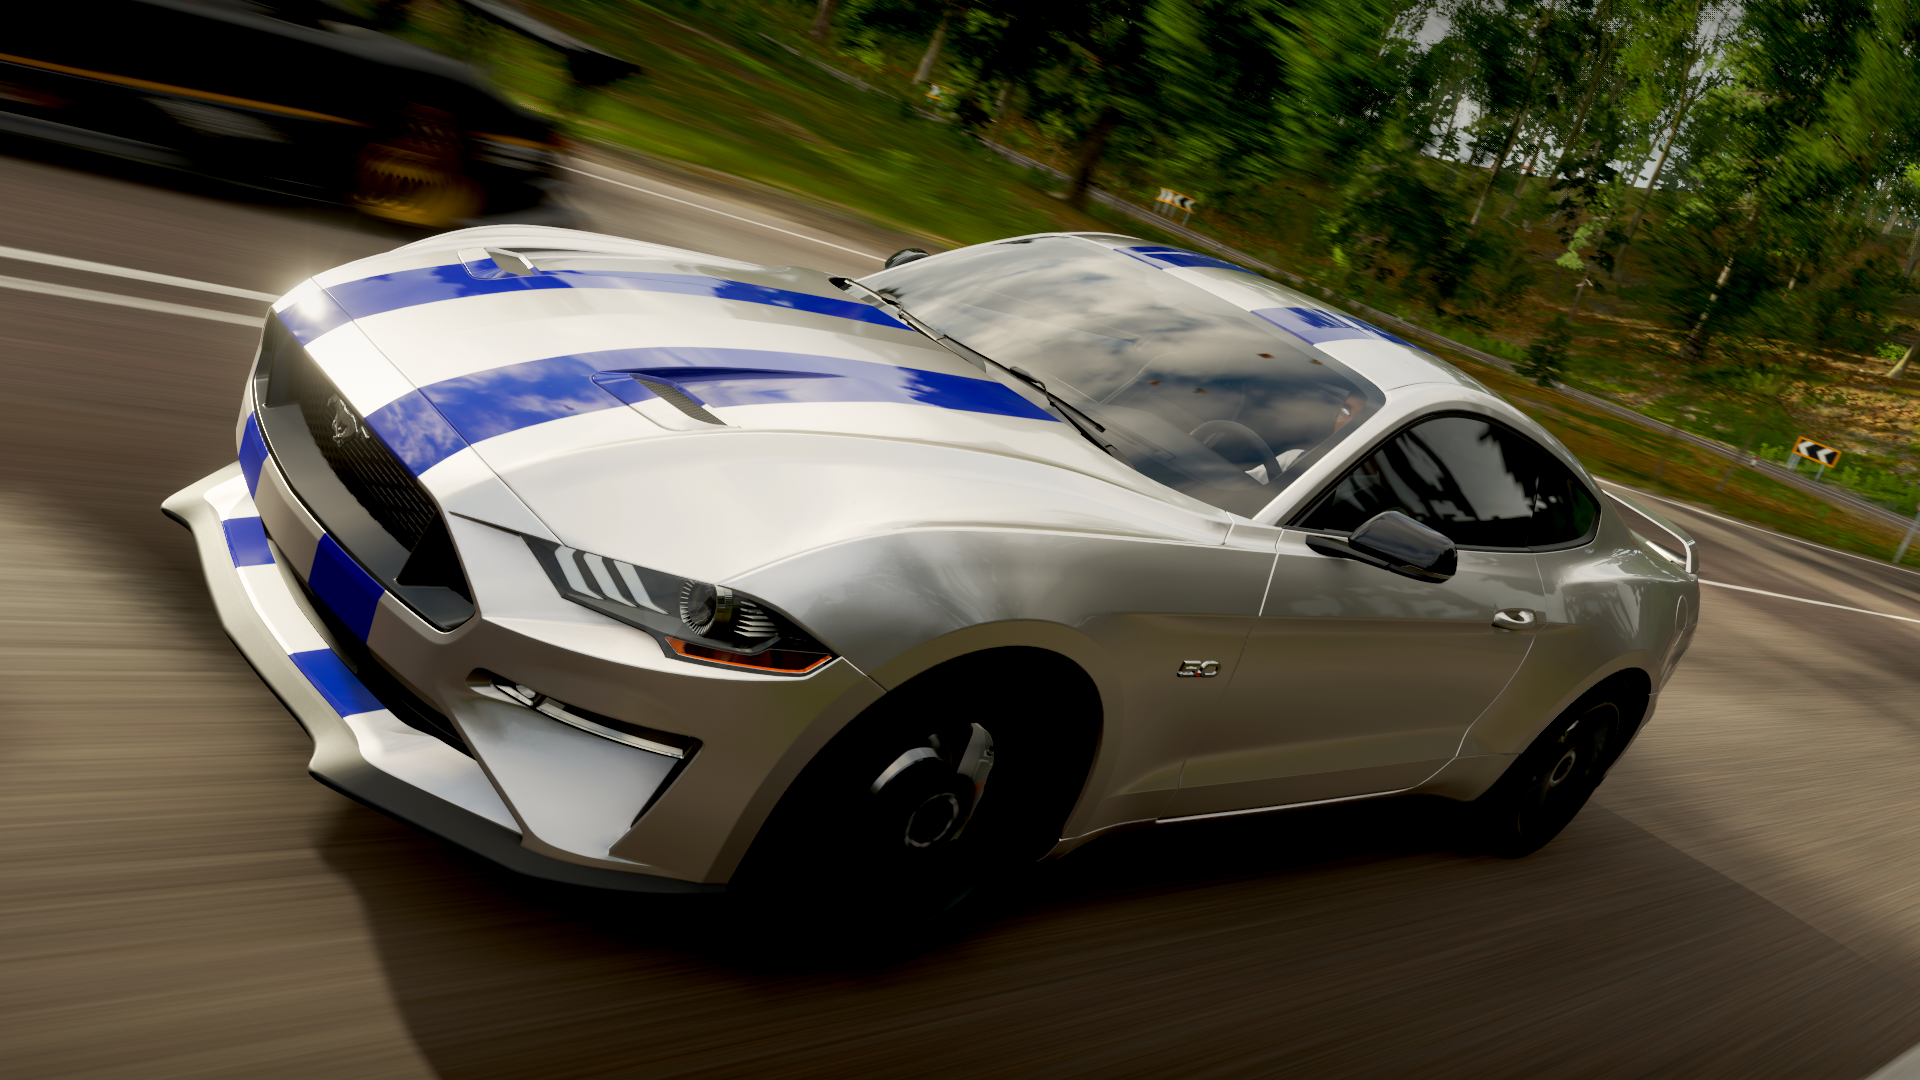 Shelby Car Ford Ford Mustang Forza Horizon 4 CGi Video Games Road Front Angle View Trees Blurry Back 1920x1080